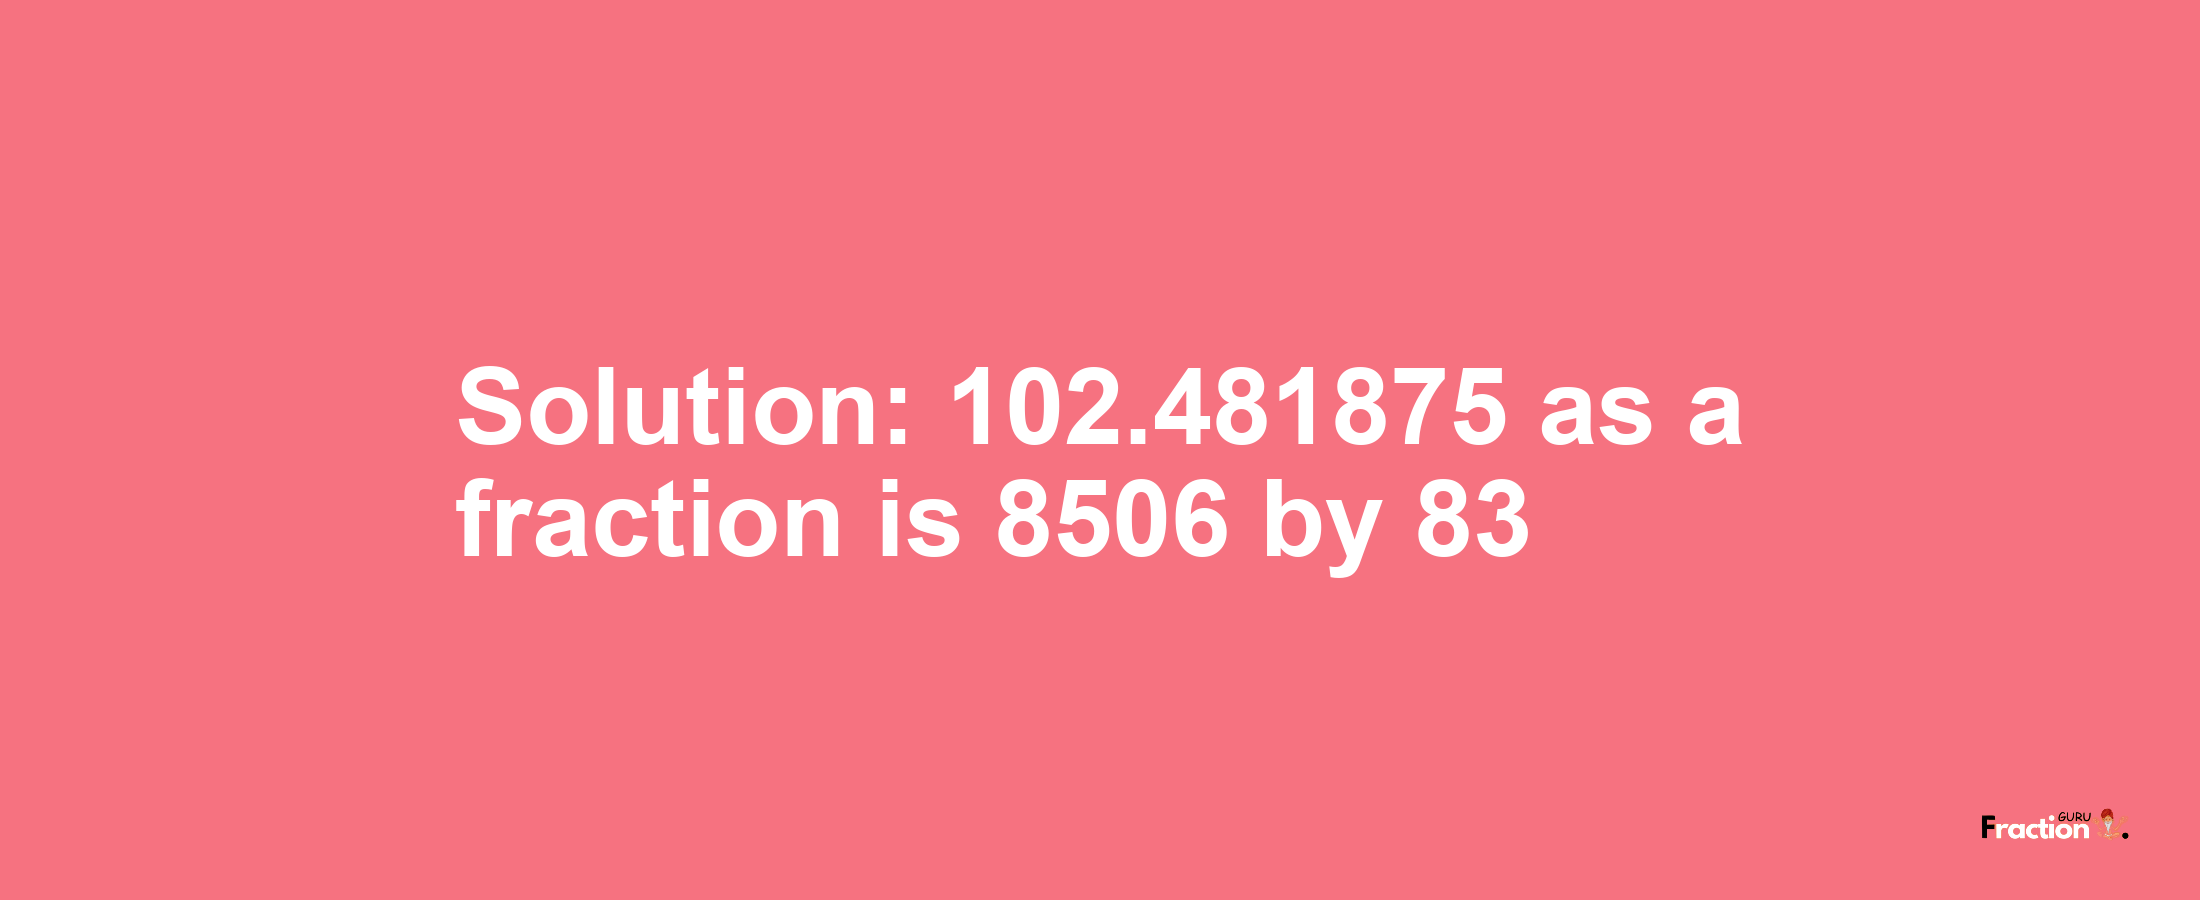 Solution:102.481875 as a fraction is 8506/83